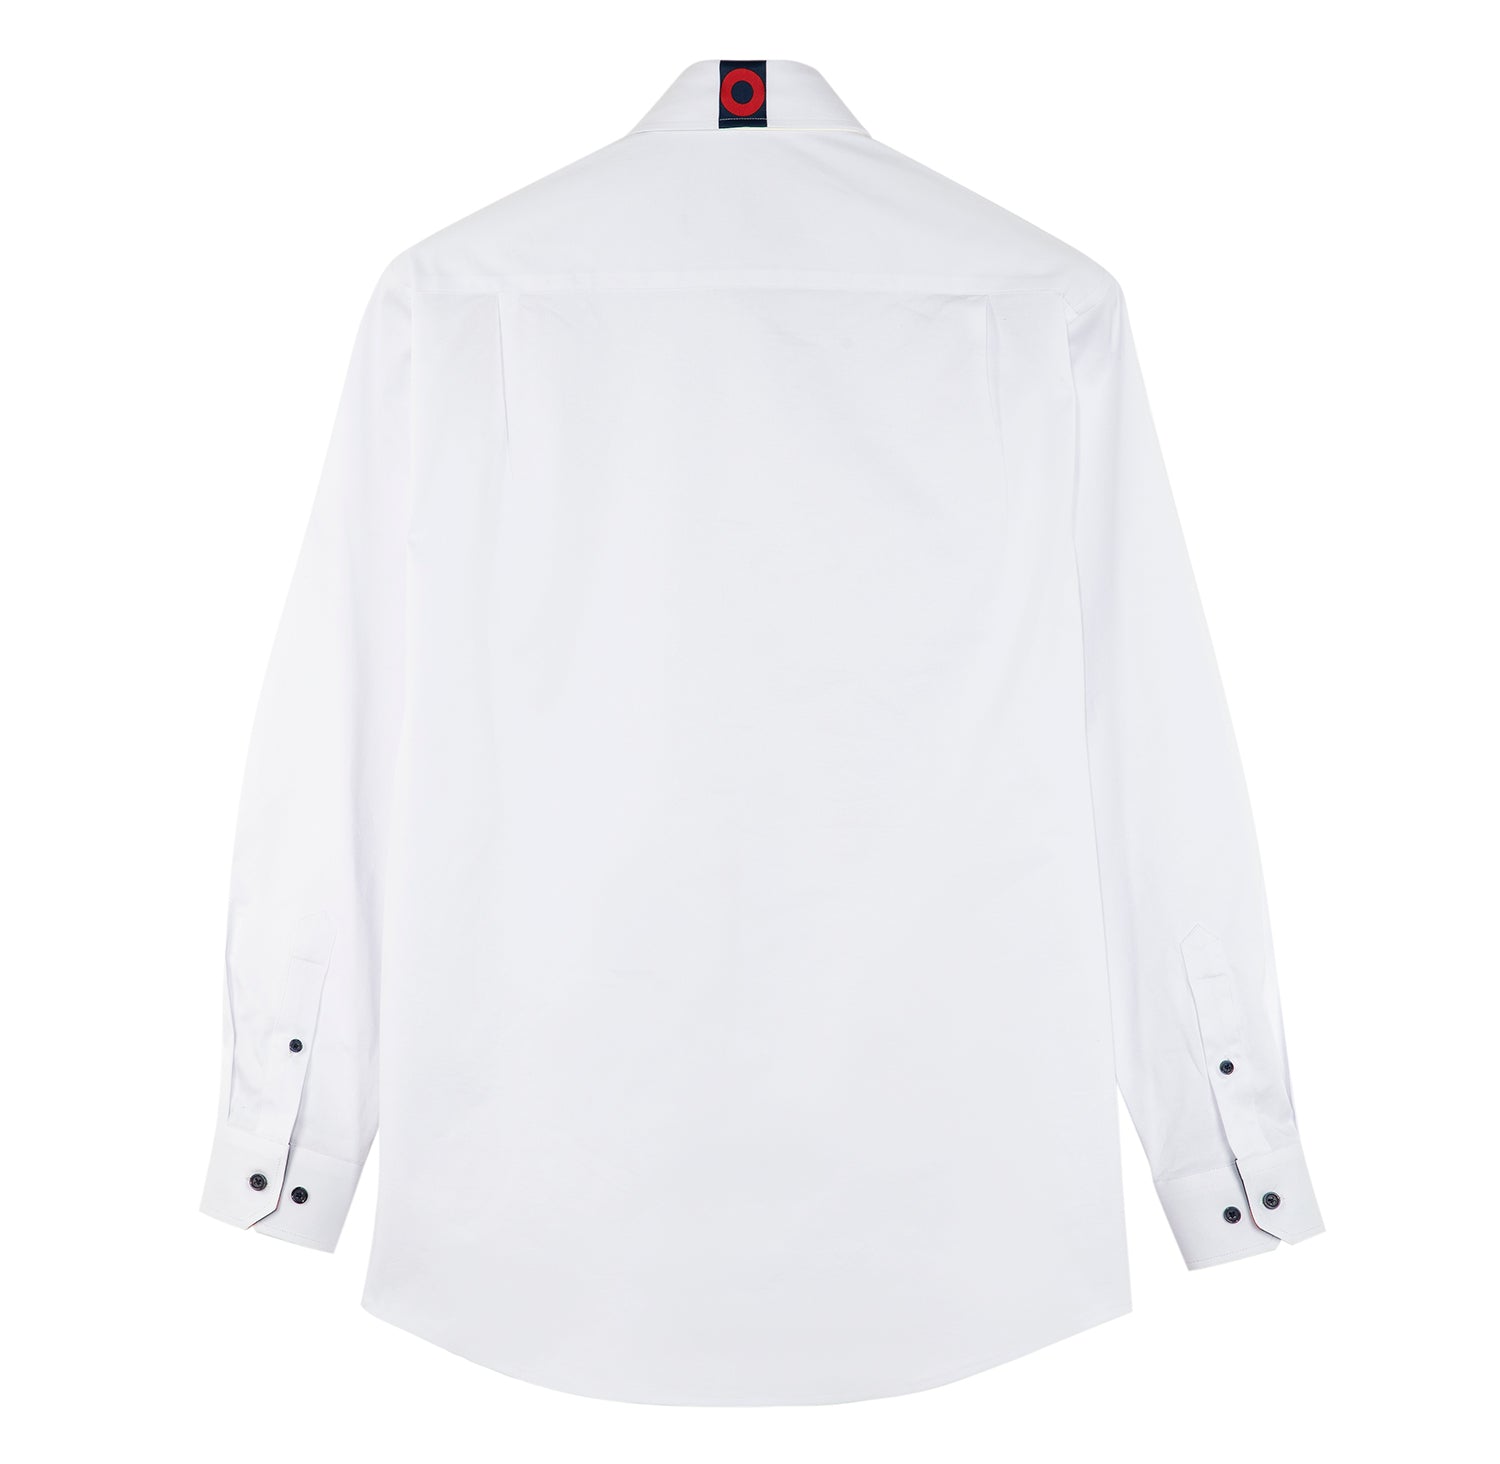 Phish Formal Long Sleeve Button Down in White - Section 119